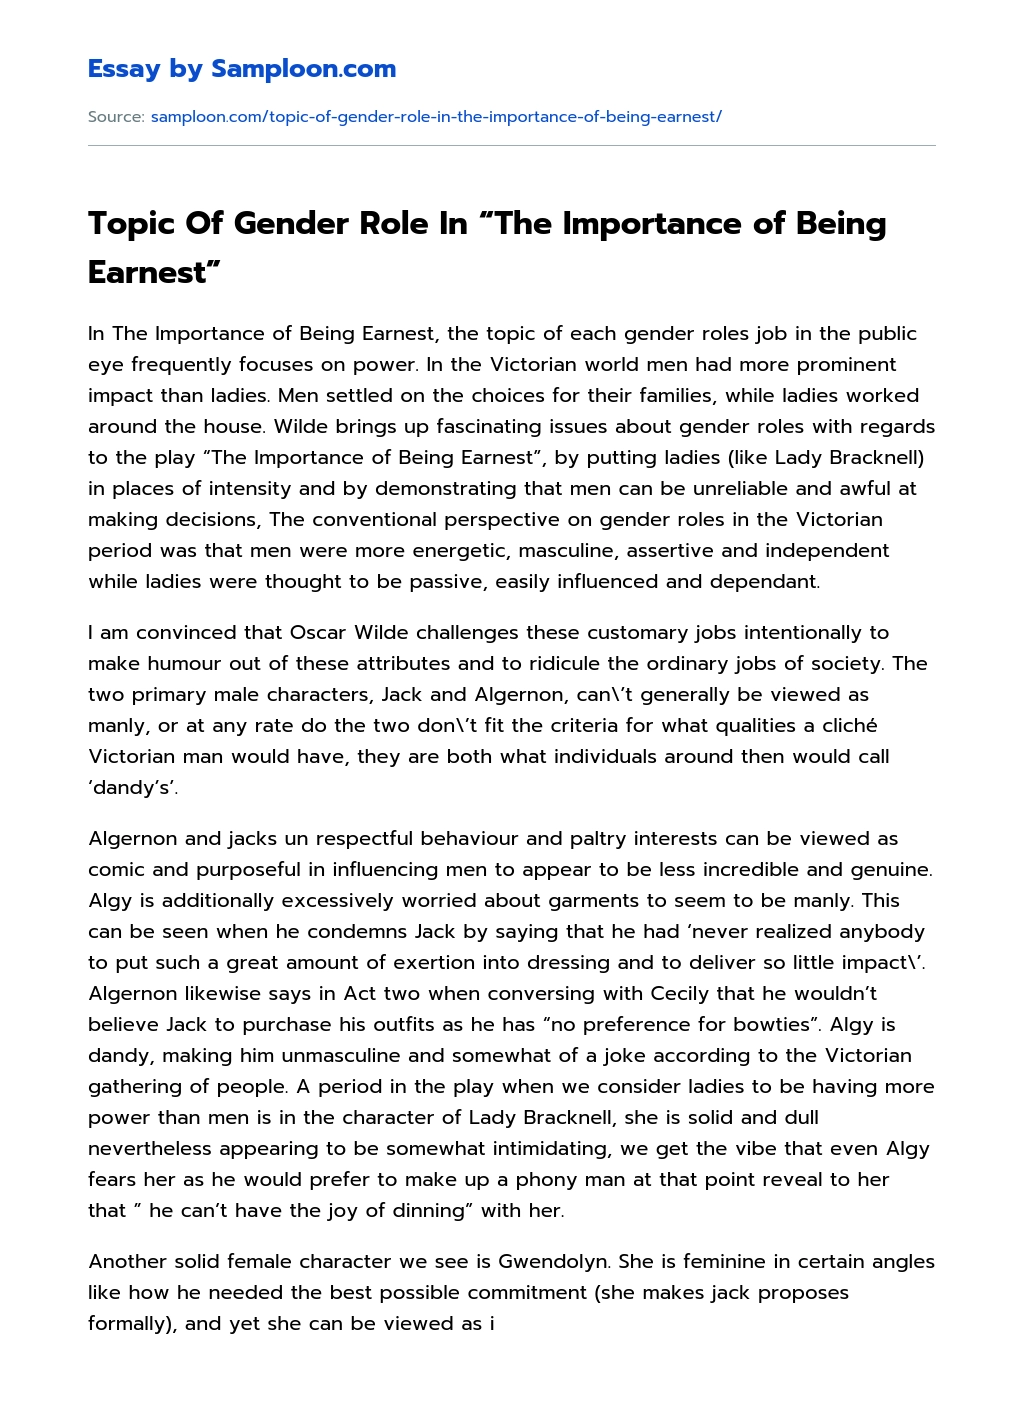 Topic Of Gender Role In “The Importance of Being Earnest” essay